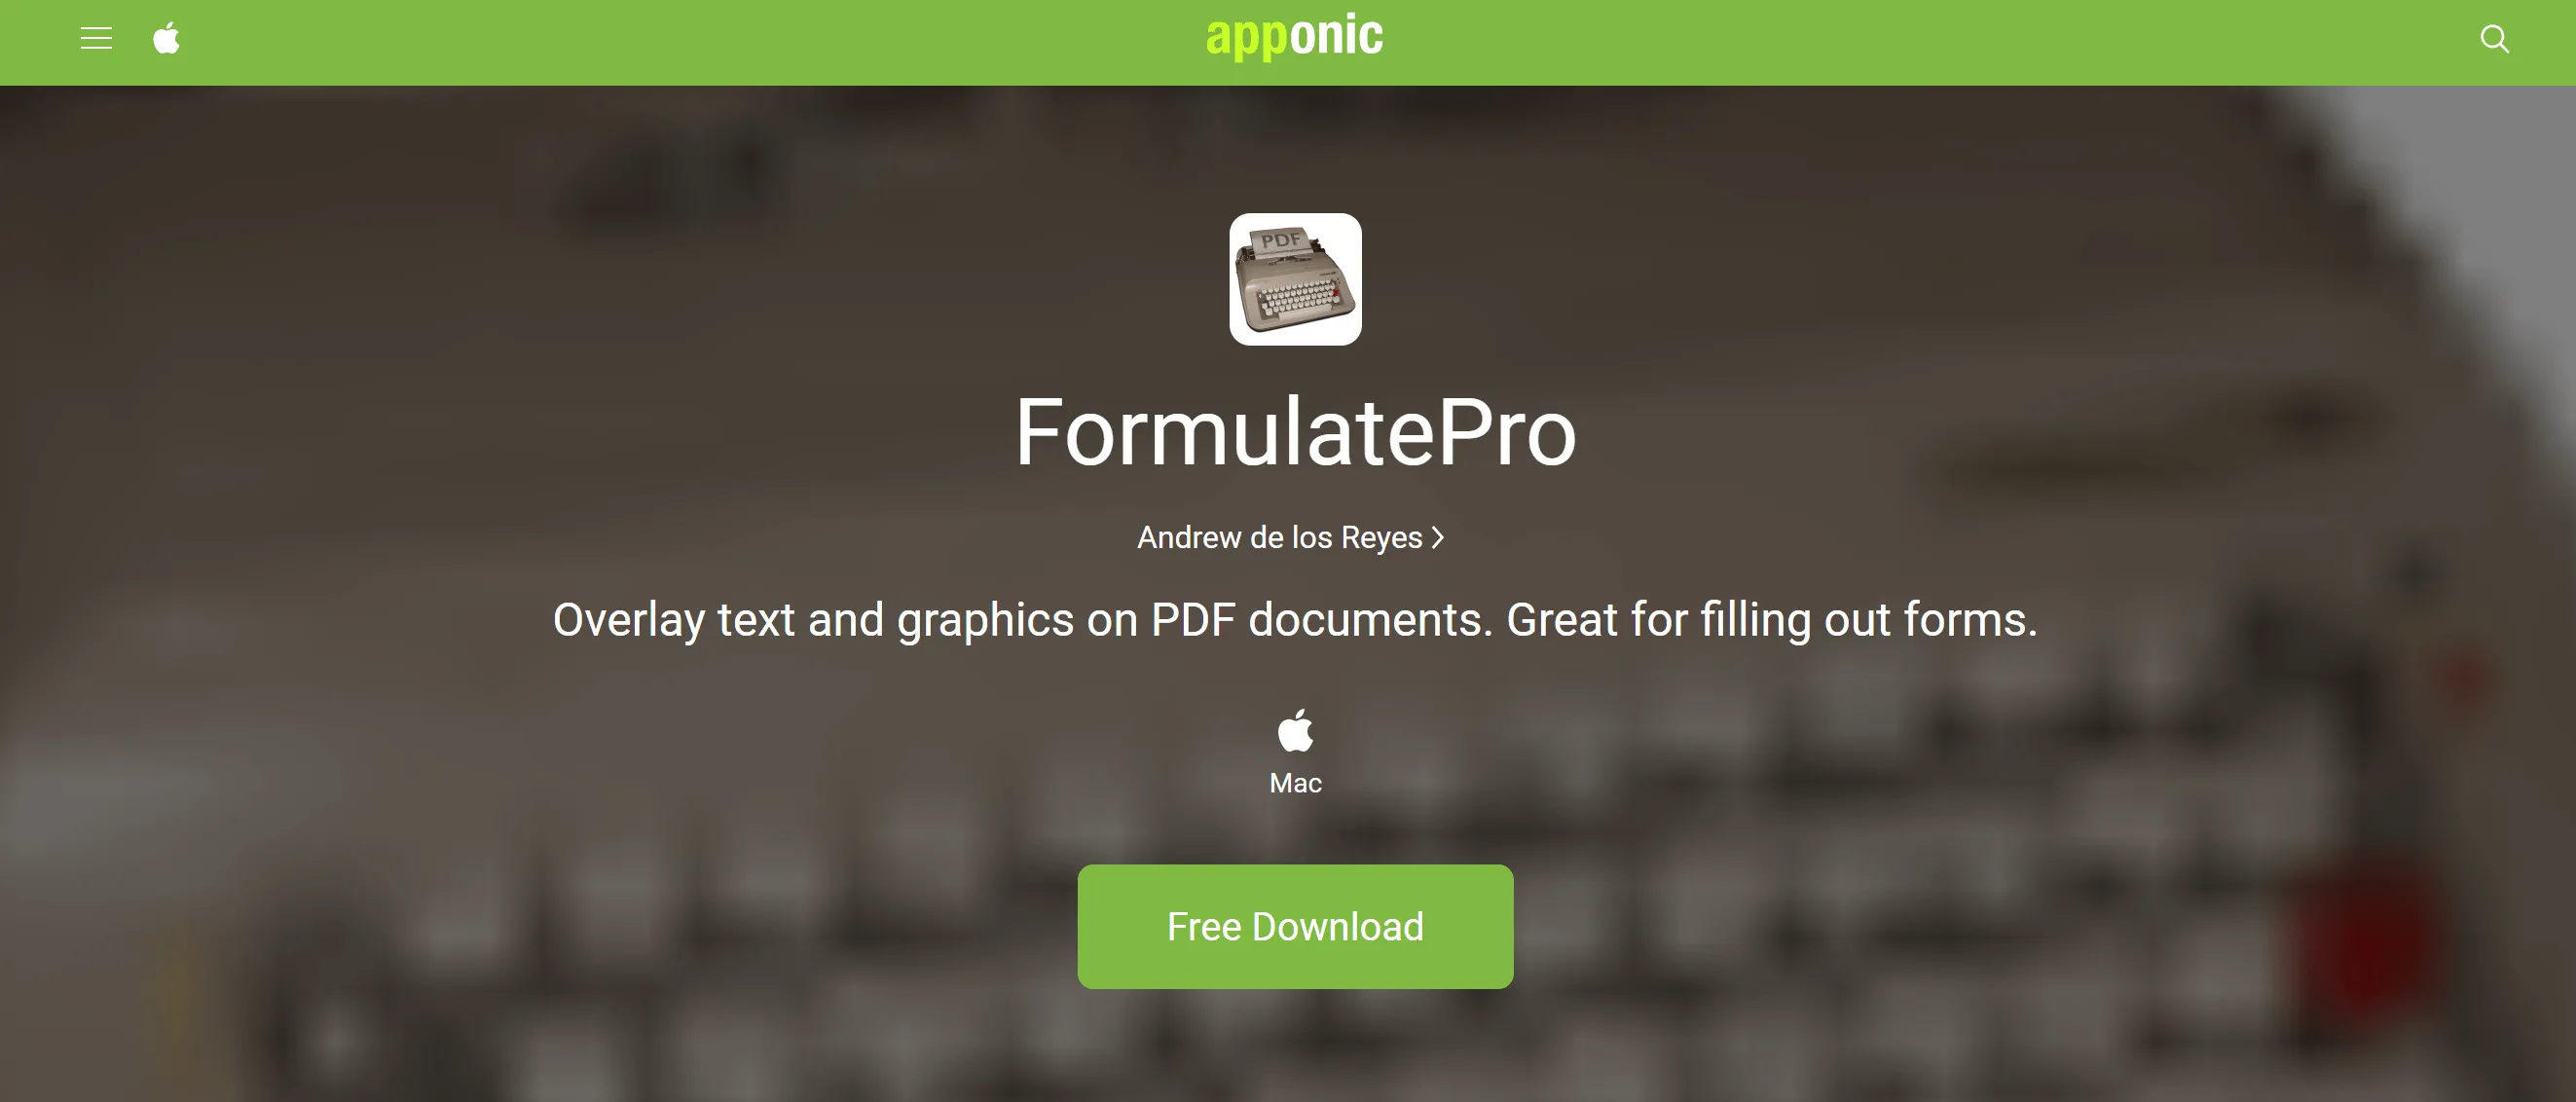 Formulate Pro for Mac